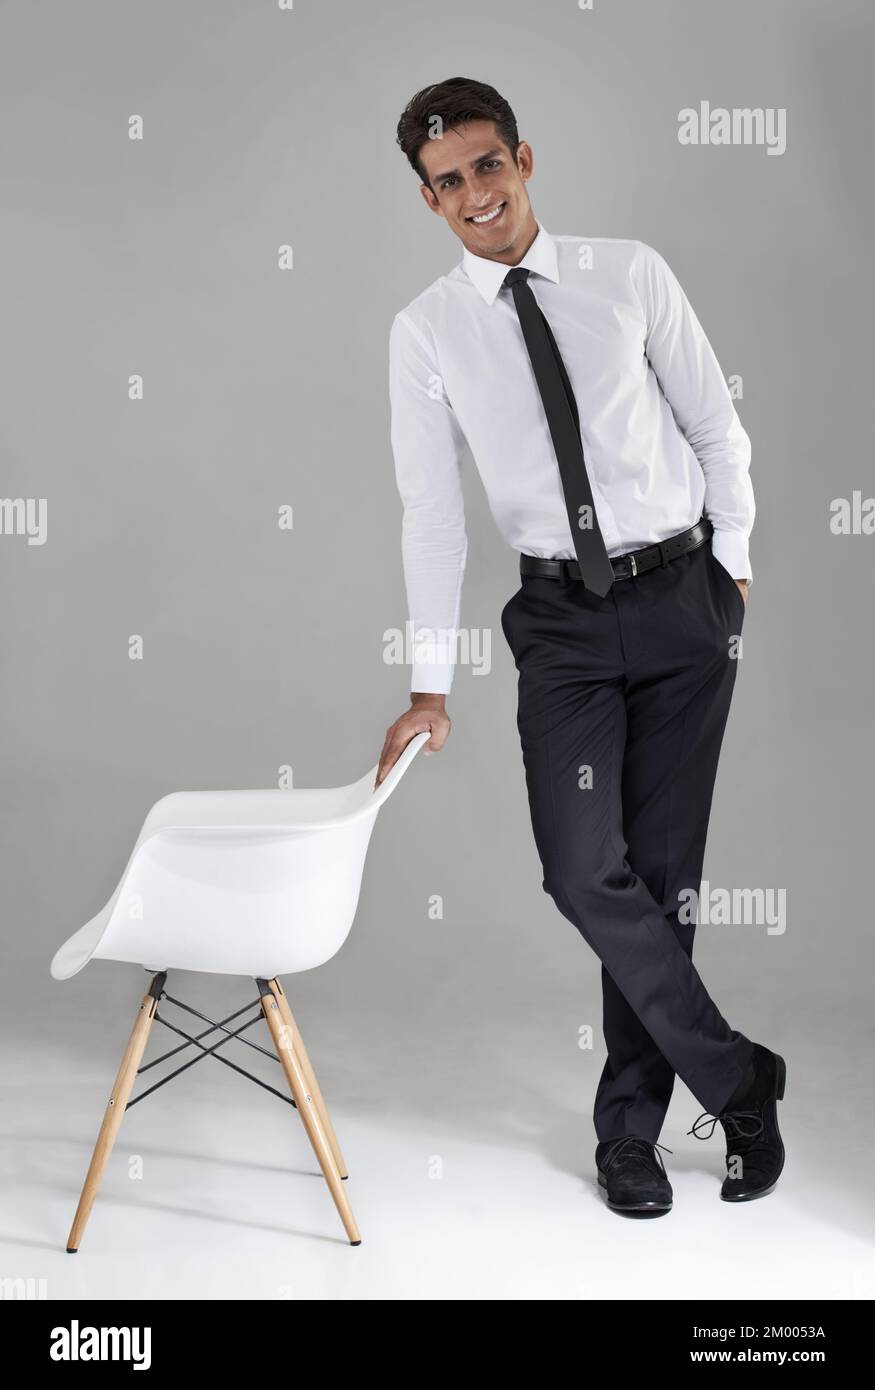 Charming and confident. Full length shot of a charming man in a shirt and tie. Stock Photo